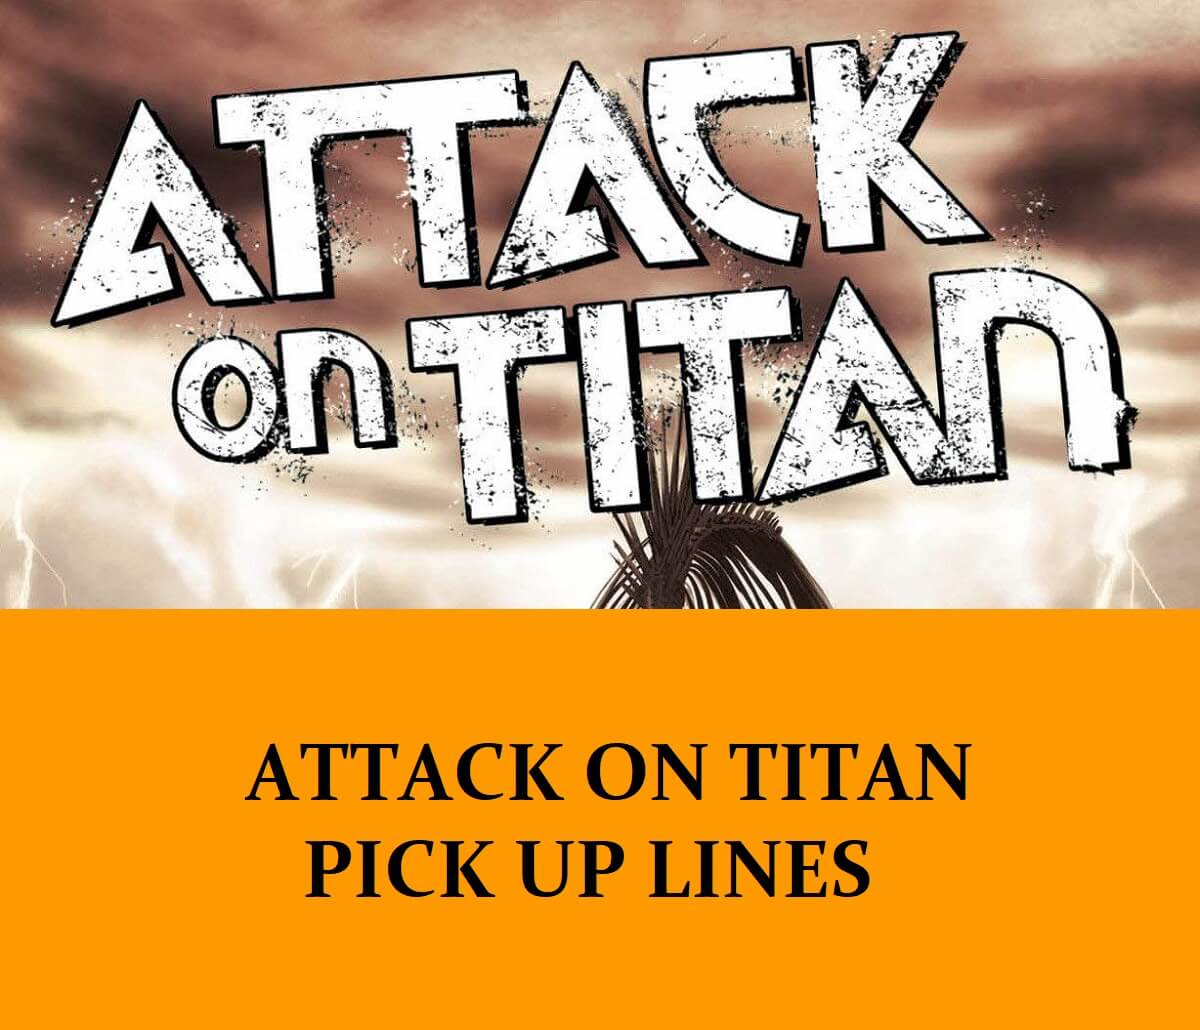 Pick Up Lines Inspired by Attack on Titan